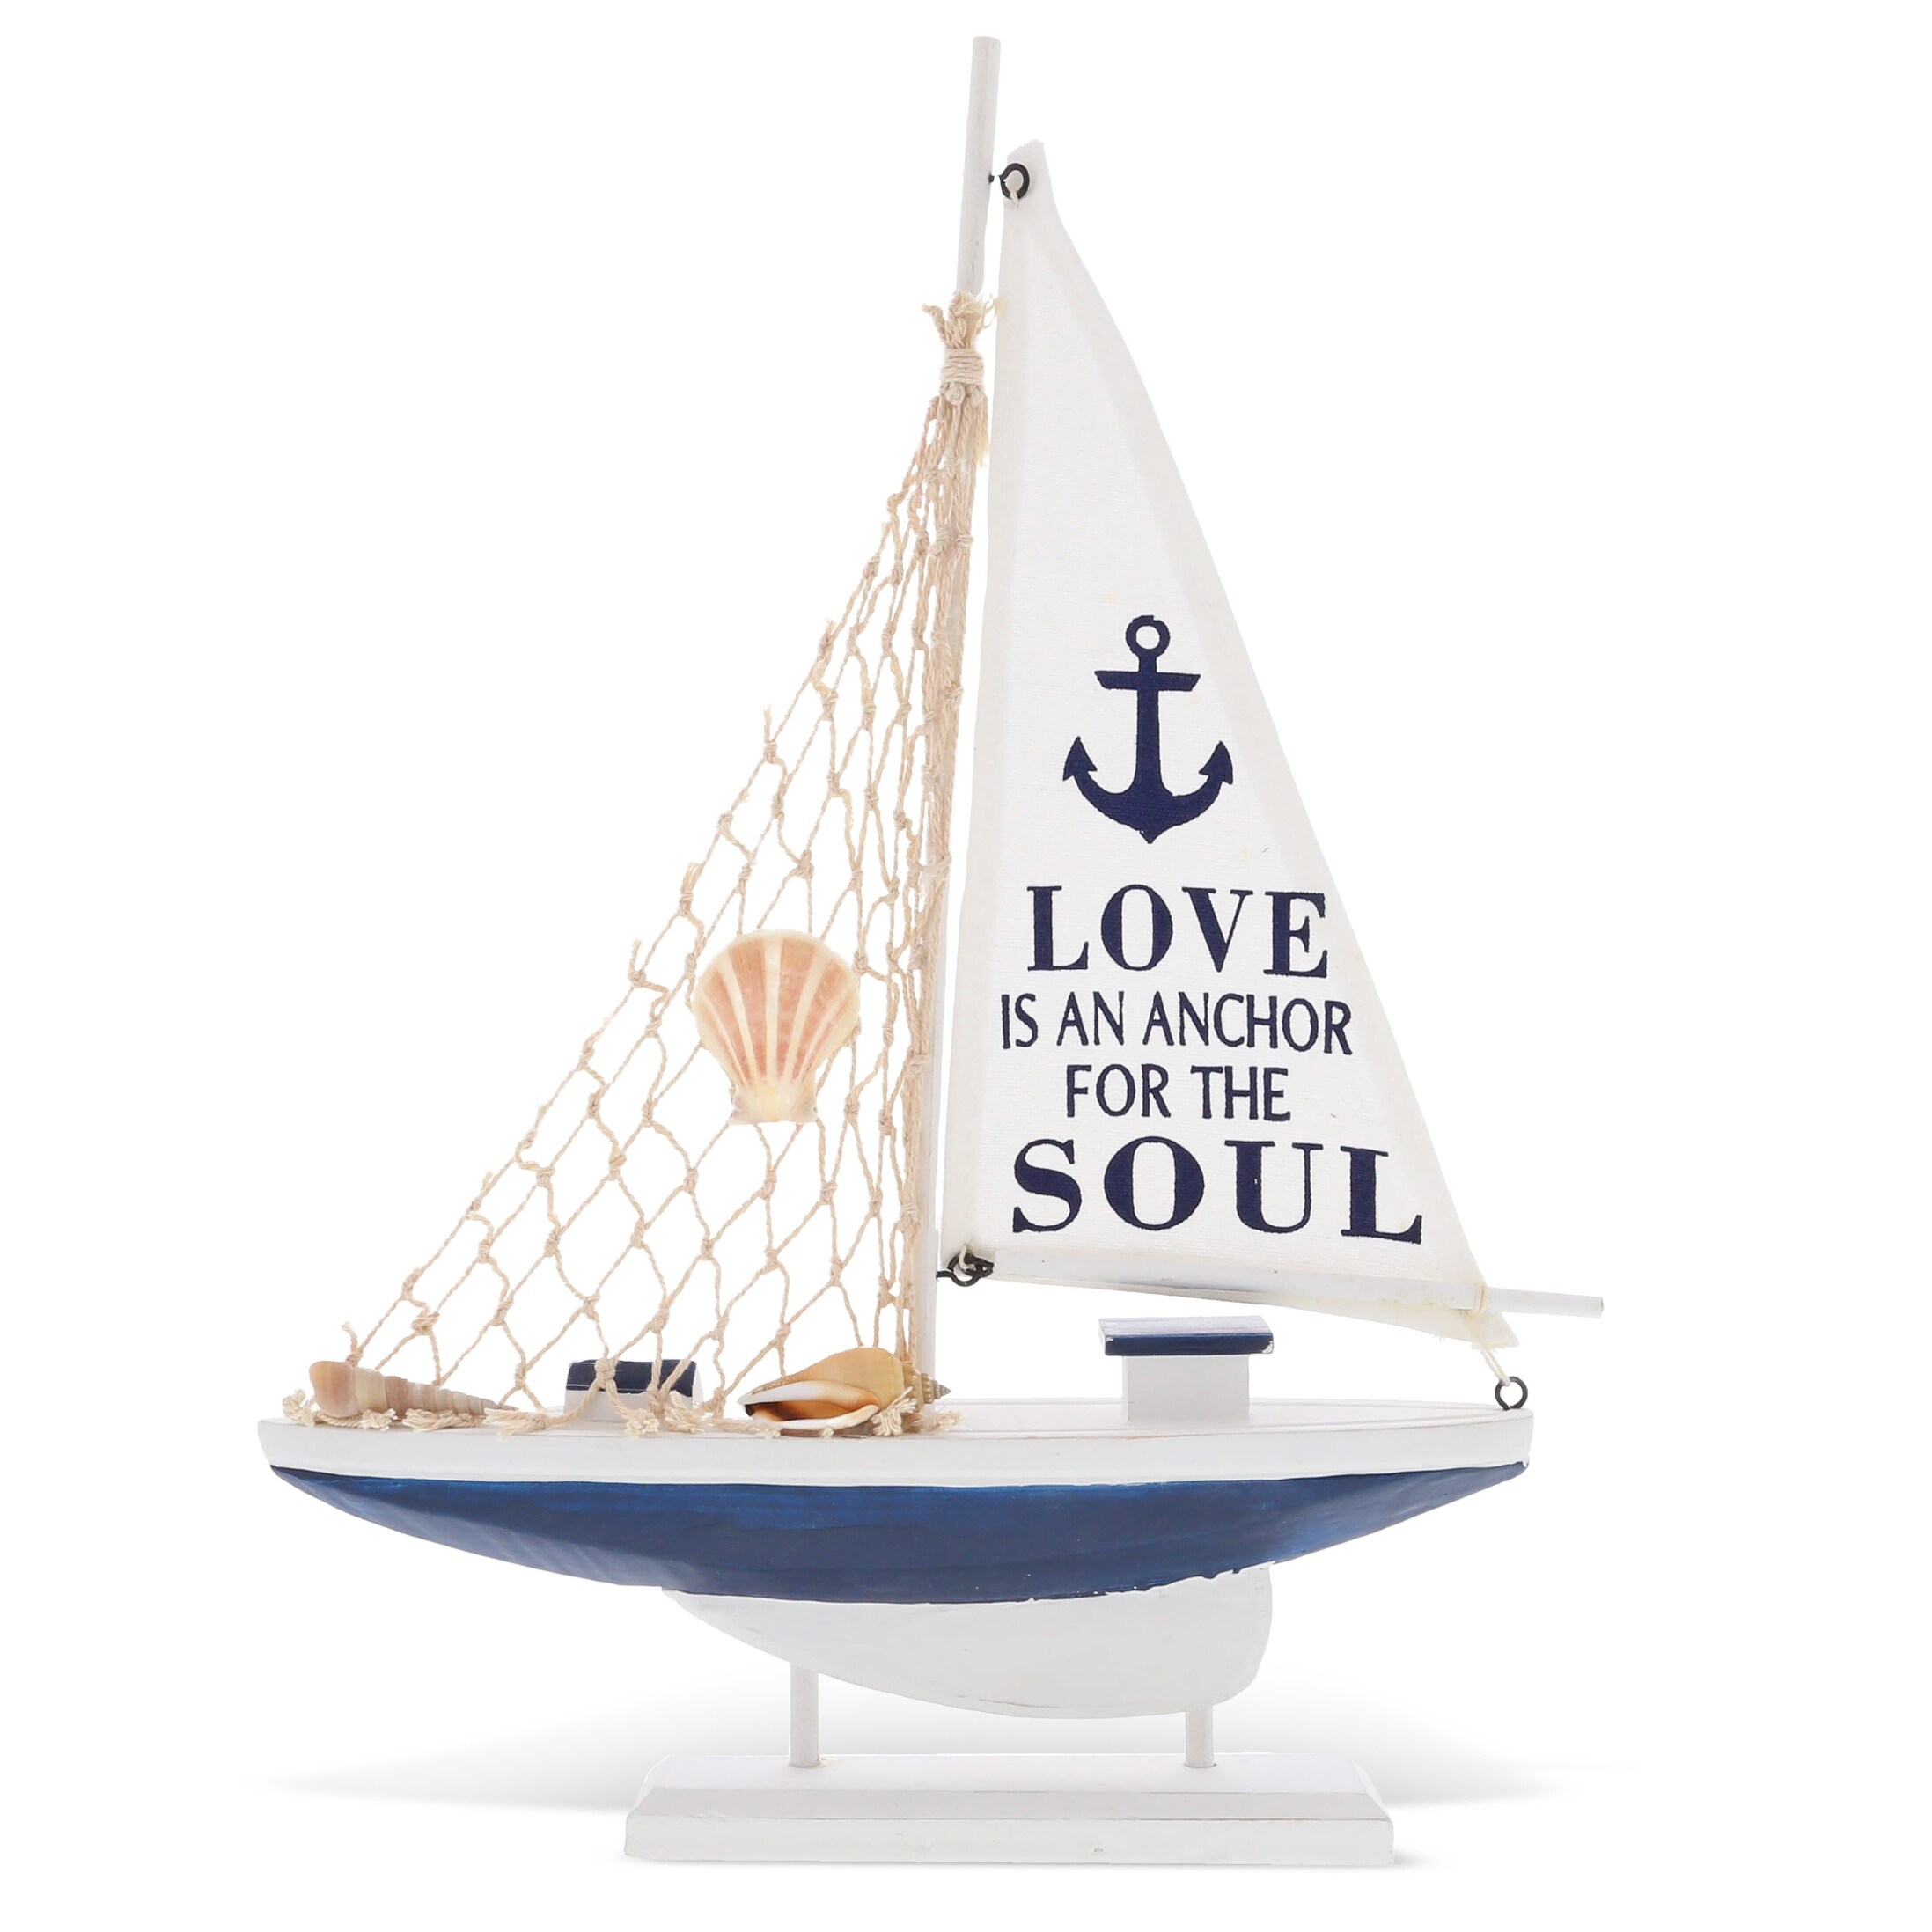 https://ak1.ostkcdn.com/images/products/is/images/direct/ad6d38a42652c46e6af4f434a0dd85d01187fa30/CoTa-Global-Ocean-Blue-Sailboat-Decor---Handmade-Wooden-Boat-Decor.jpg